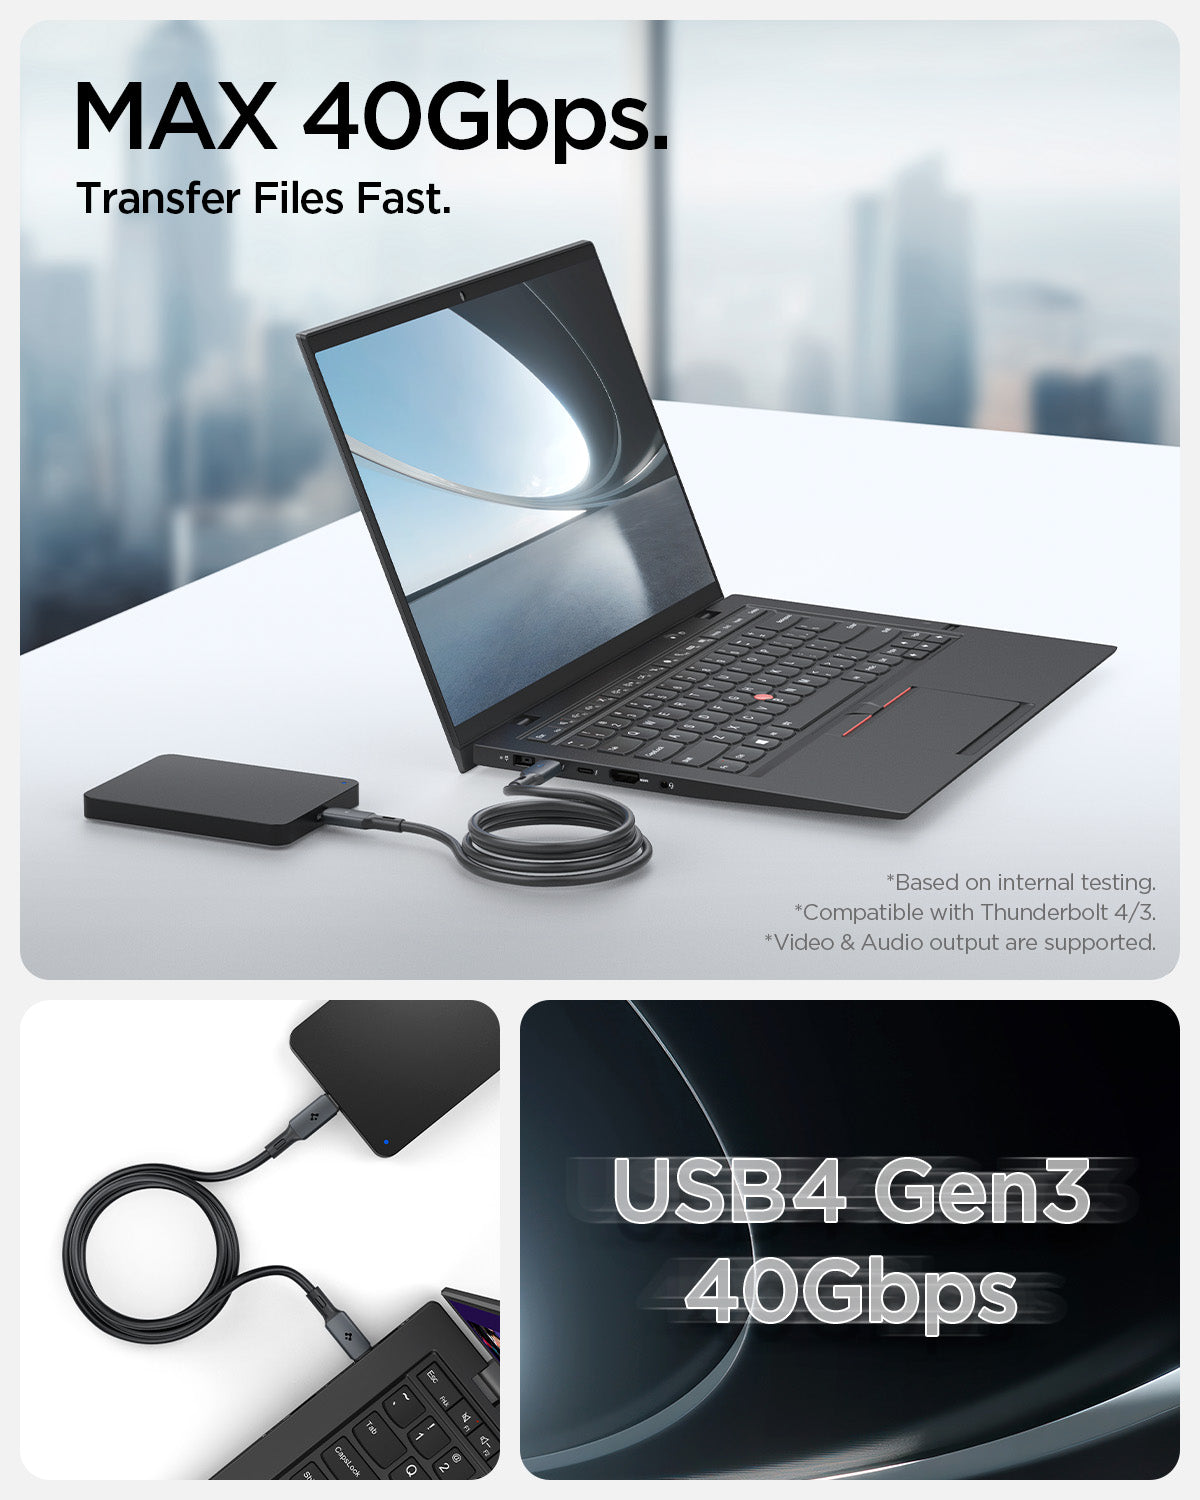 ACA06839 - ArcWire™ USB-C to USB-C Cable PB2202 in Black showing the Max 40Gbps. Transfer Files Fast. USB4 Gen3 40Gbps. Showing devices on attached to a power bank with a charging cable. Base on internal testing. Compatible with Thunderbolt 4/3, Videos, Audio output are supported